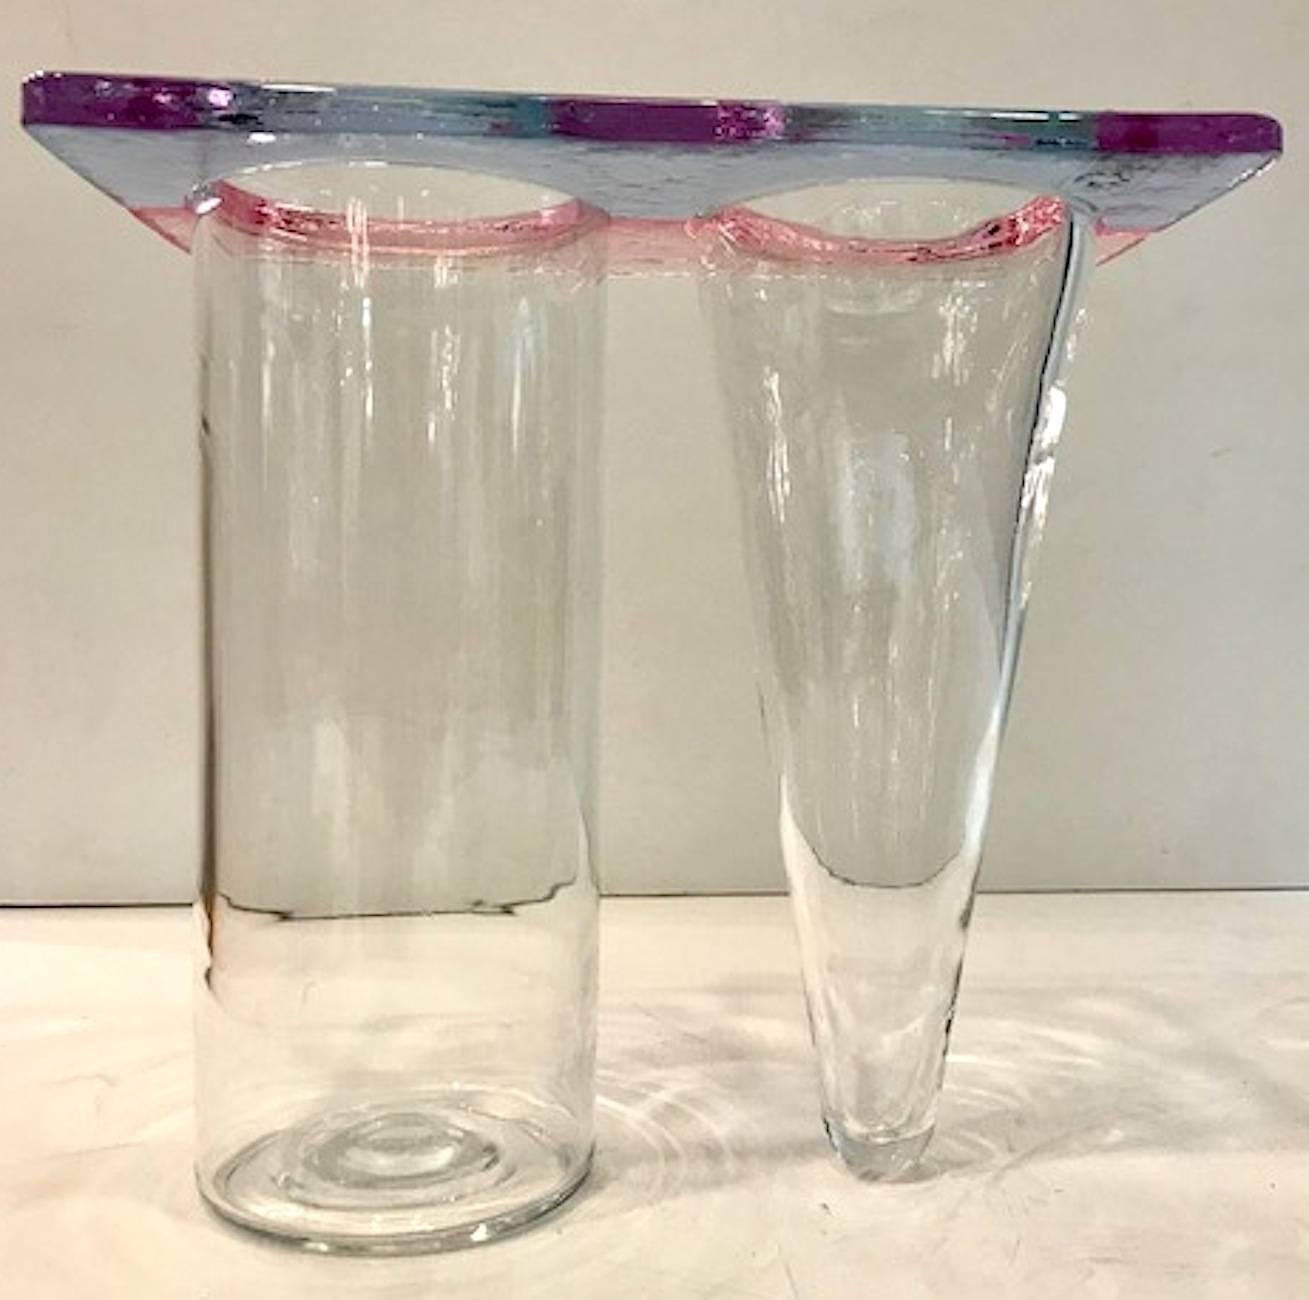 A geometric design double vase typical of the Memphis style from the 1980s. Blown in light blue, pink and clear glass, the double vase features one side in a column and the other side in a cone shape. Very very fine condition.